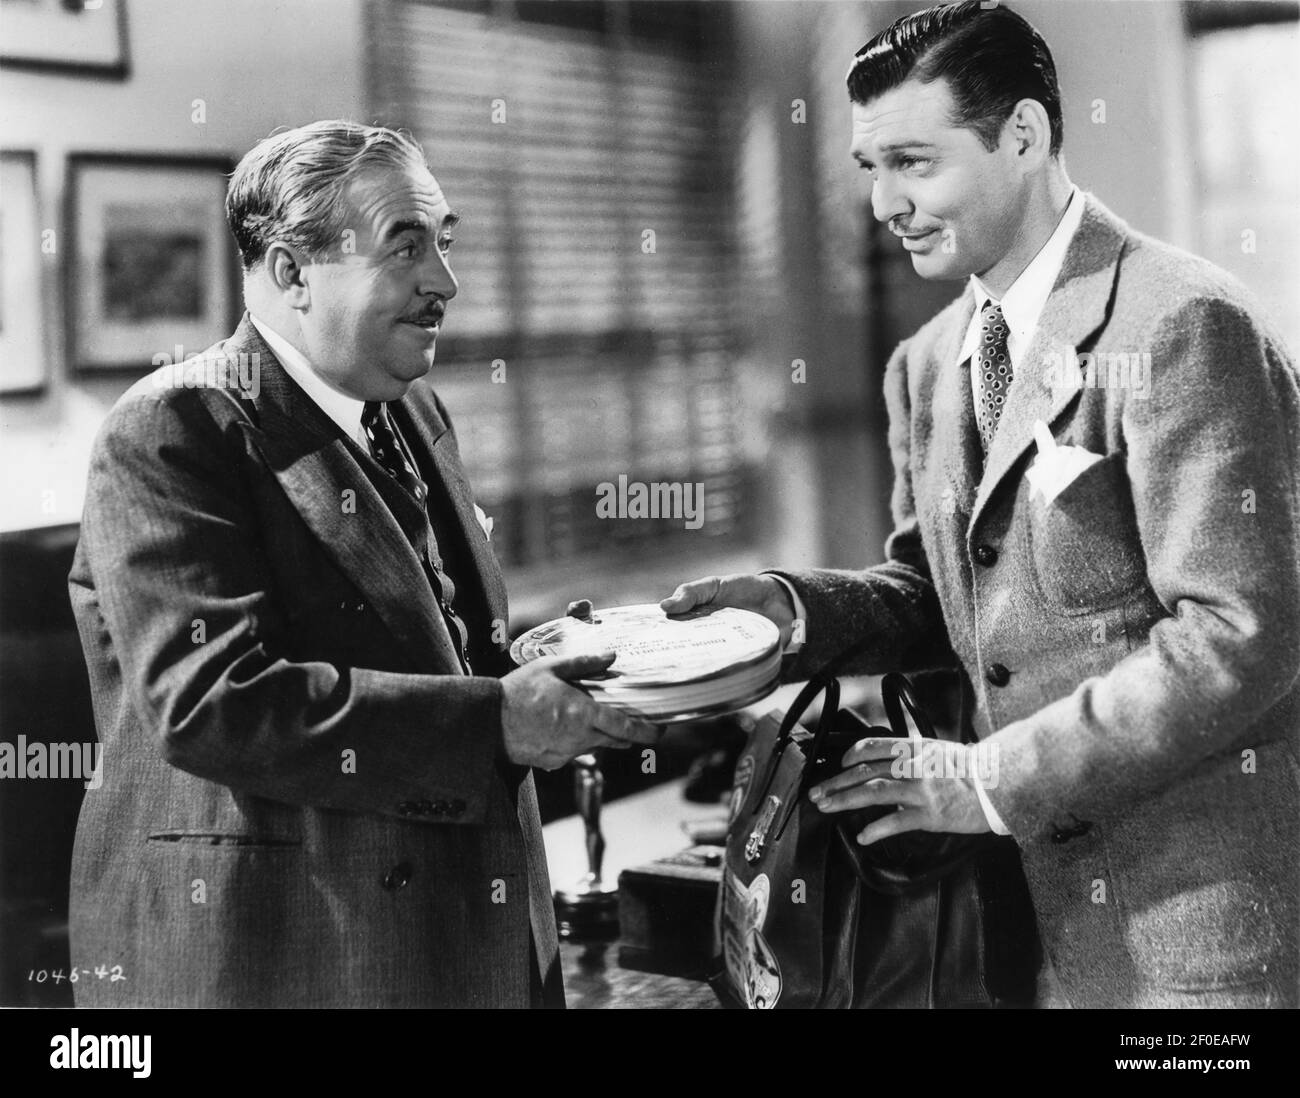 WALTER CONNOLLY and CLARK GABLE in TOO HOT TO HANDLE 1938 director JACK CONWAY based on a story by Len Hammond screenplay Laurence Stallings and John Lee Mahin wardrobe Dolly Tree music Franz Waxman producer Lawrence Weingarten Metro Goldwyn Mayer Stock Photo